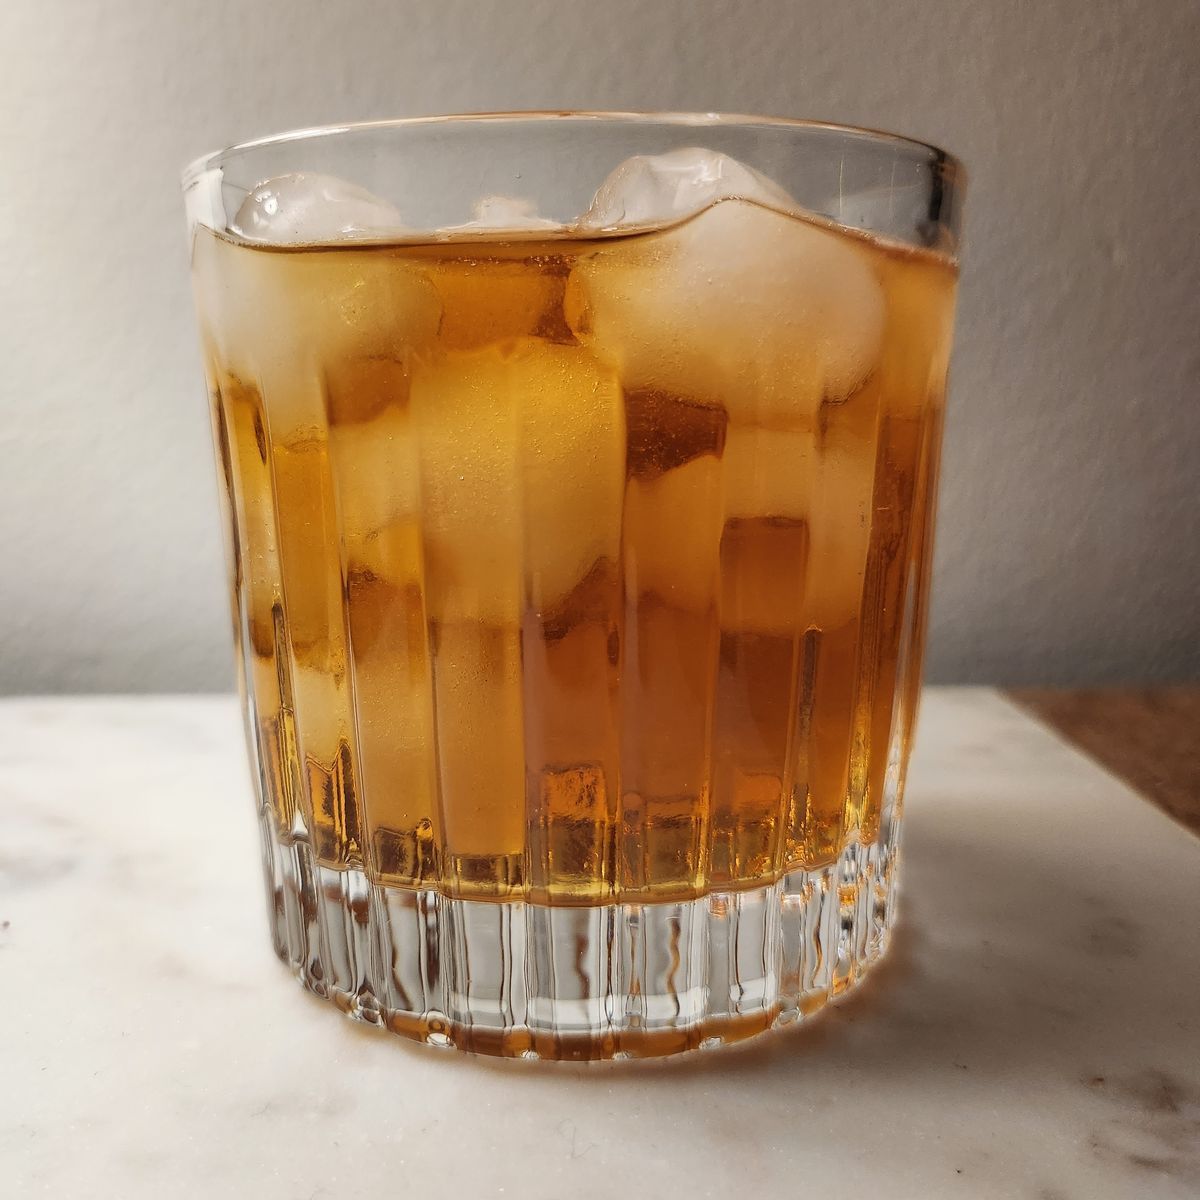 A cognac and chestnut liqueur highball named for The French Connection, a 1971 film starring Gene Hackman. The recipe originally called for amaretto, but I killed my amaretto with last week's Italian Sunset so I substituted the chestnut liqueur instead. It turned out delicious! Cheers!